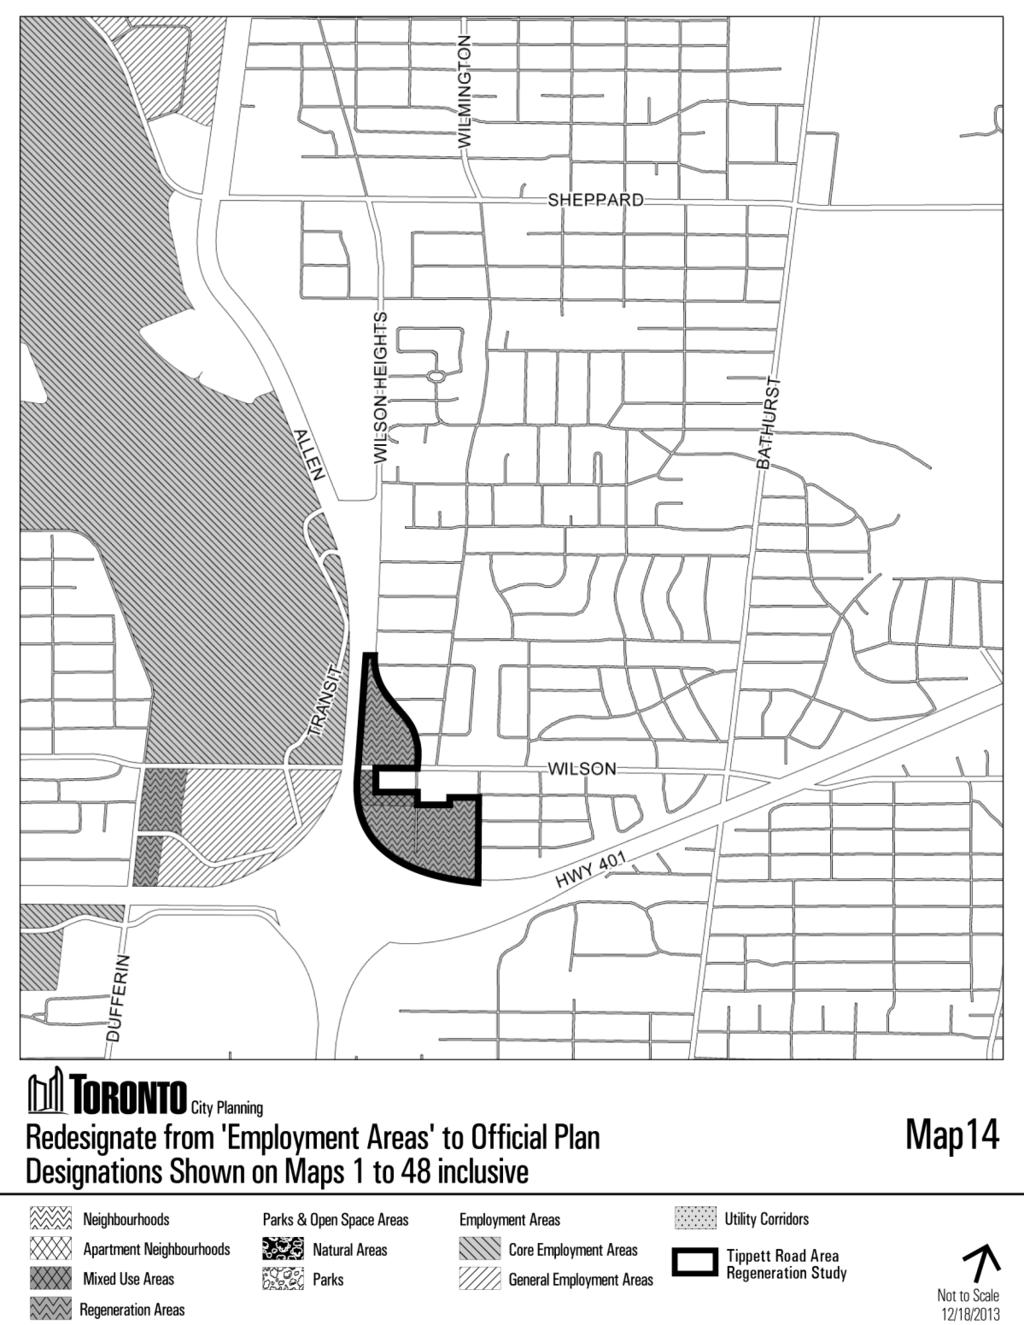 Attachment 3: OPA 231 Lands Redesignated Regeneration Areas & Mixed Use